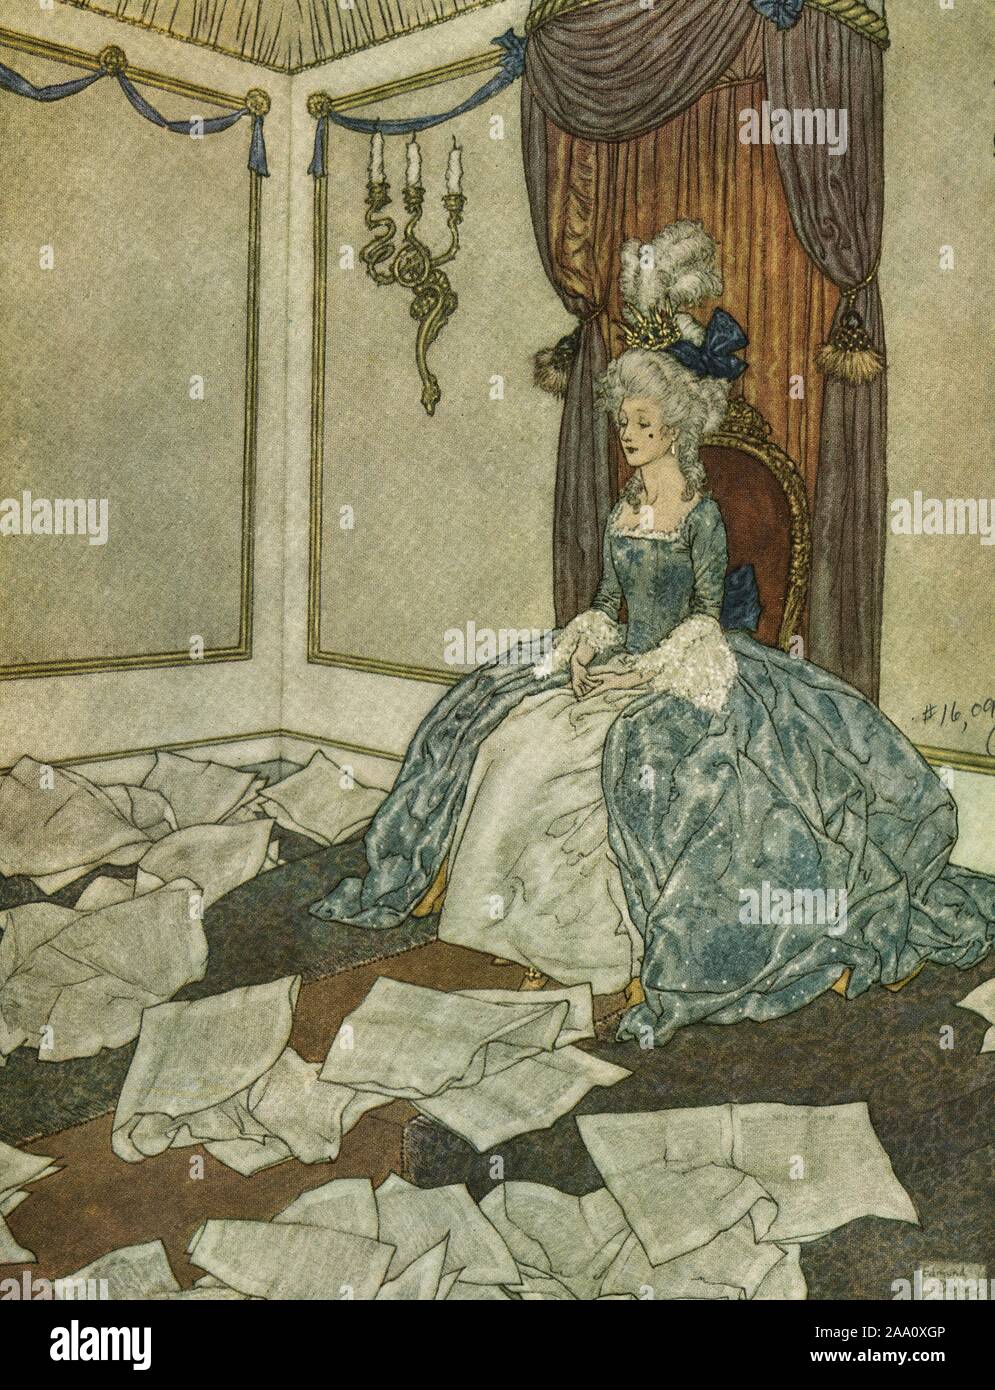 Illustration of the tale 'The Snow Queen' by Hans Christian Andersen, featuring a princess in period clothing sitting on her throne with newspapers strewn across the floor in front of her, by artist Edmund Dulac, from the book published by Hodder and Stoughton, 1911. From the New York Public Library. () Stock Photo